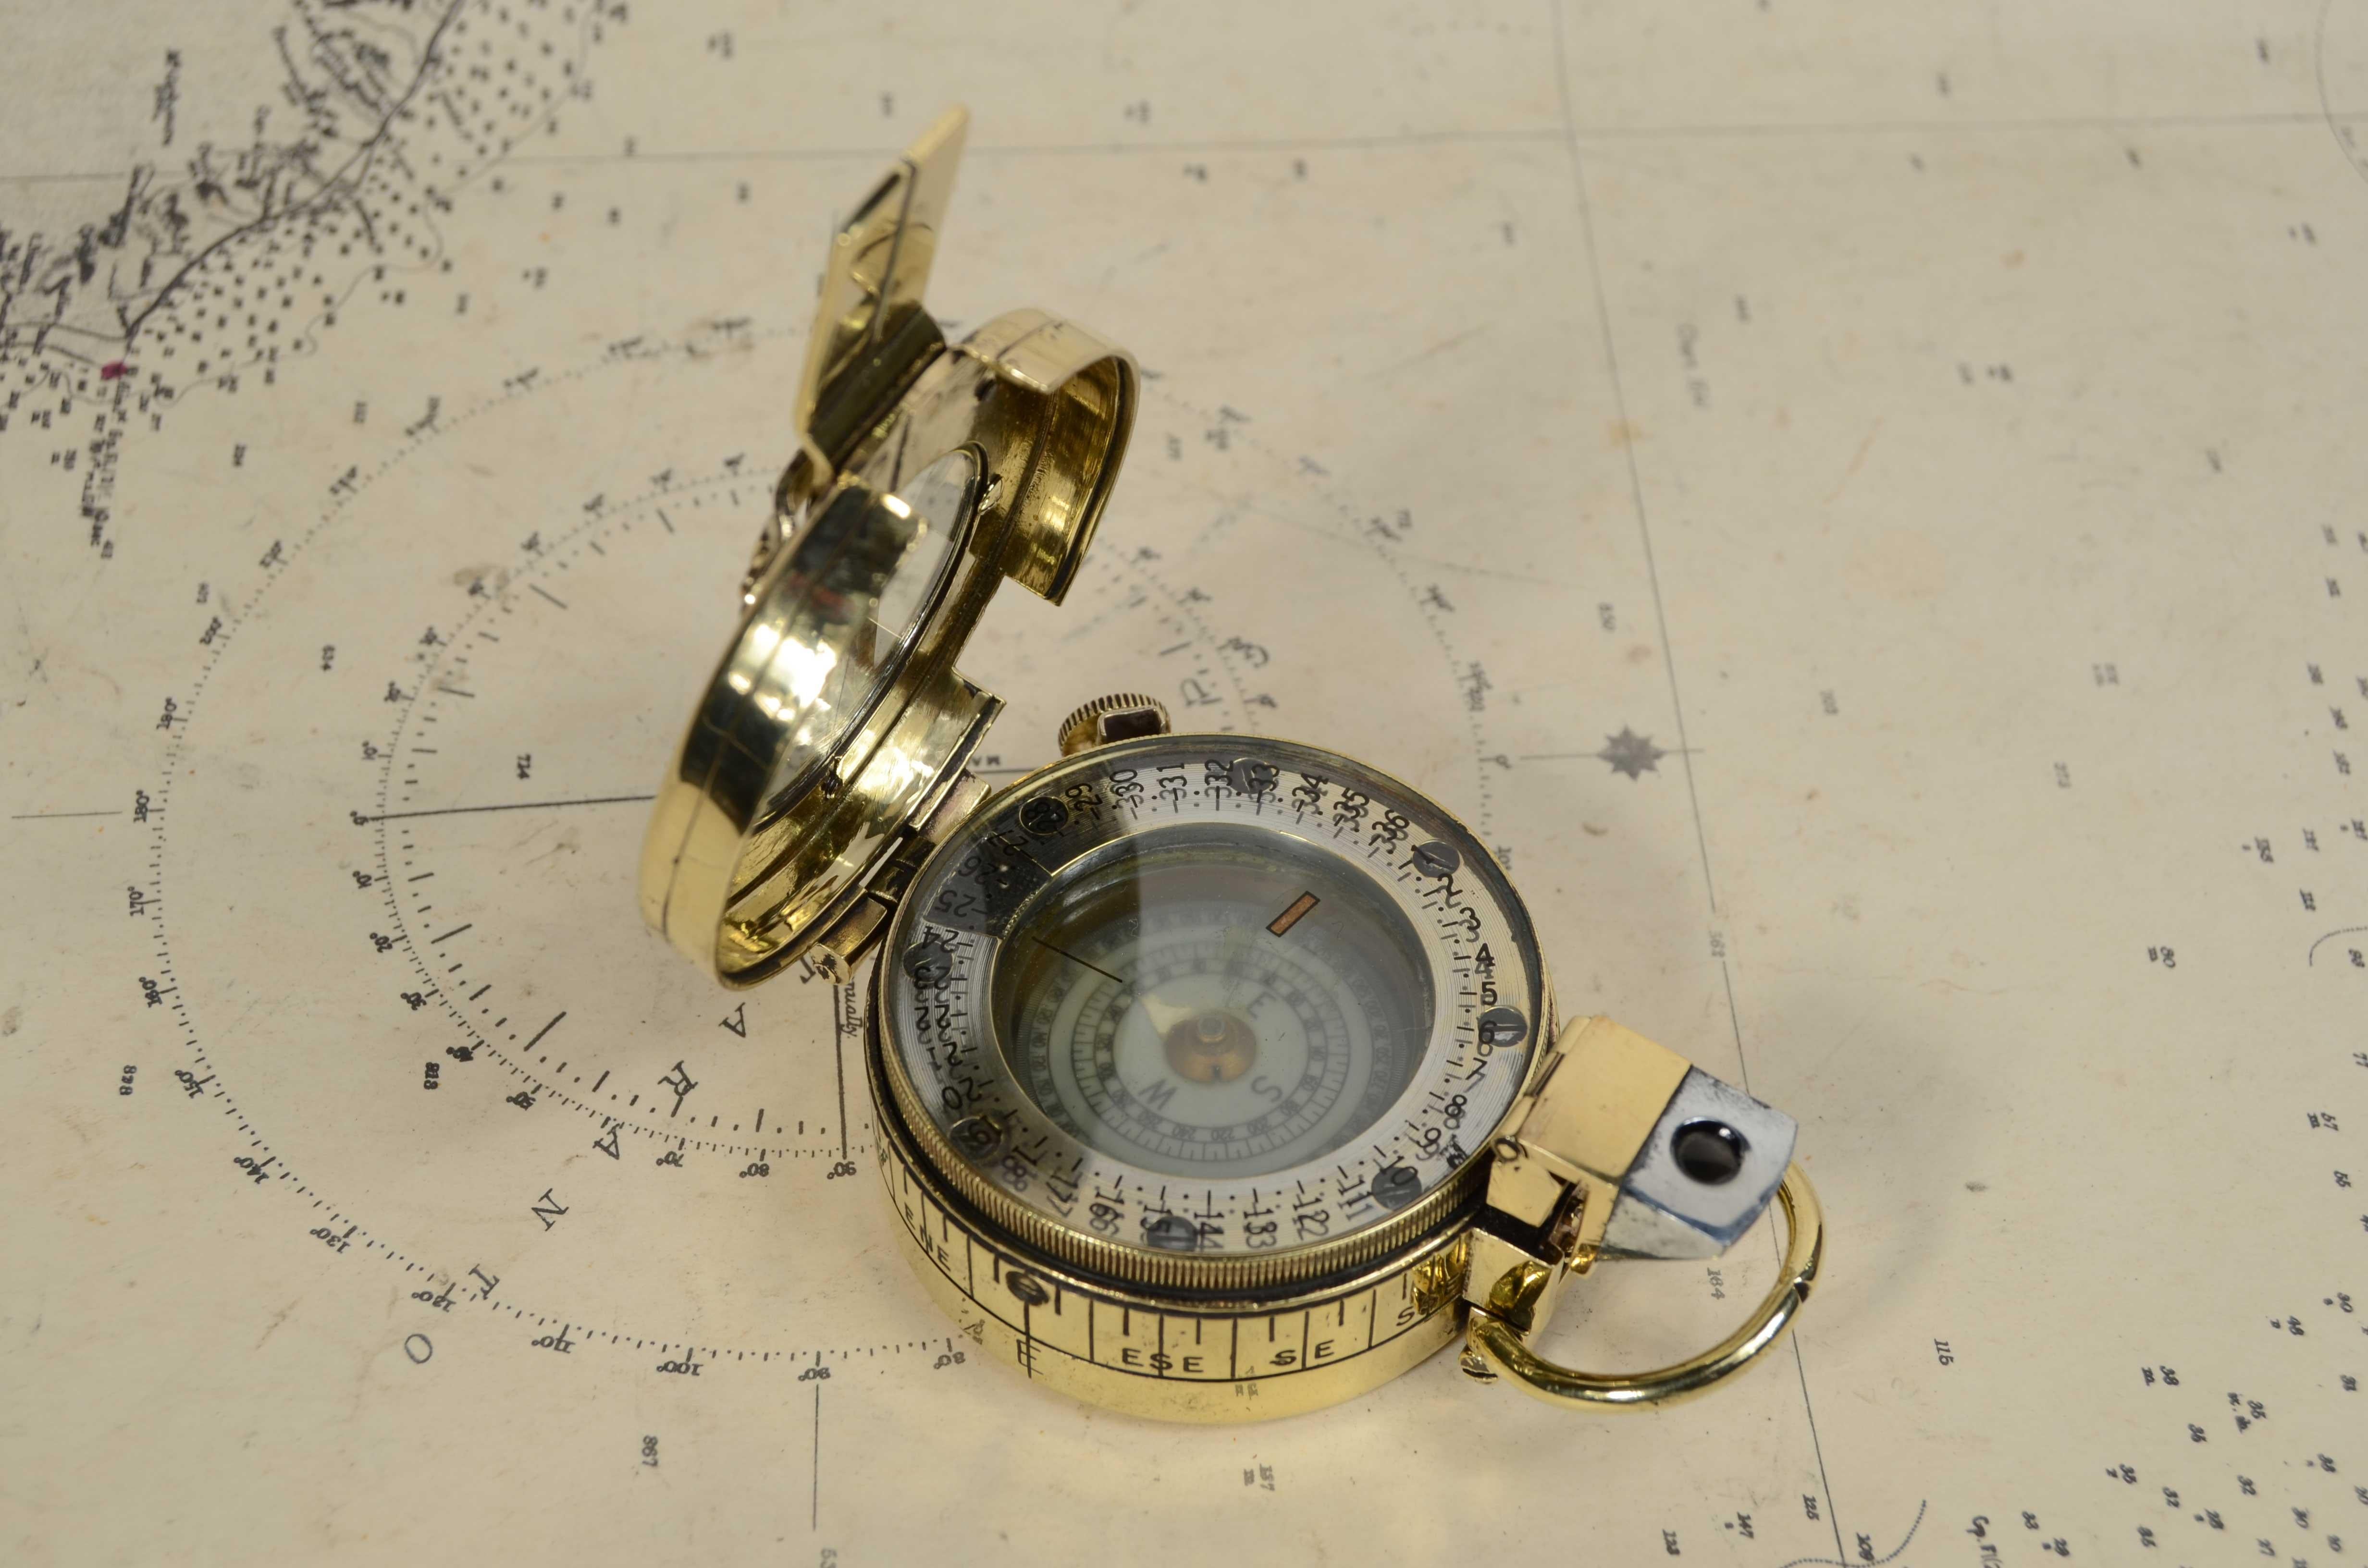 Prismatic compass  by detection signed T.G. Co Ltd London no. B 21681 1940 MK  III, in use by British army officers during World War II. This is a small vintage compass typically used in recreational sailing, thus on boats less prone to magnetic